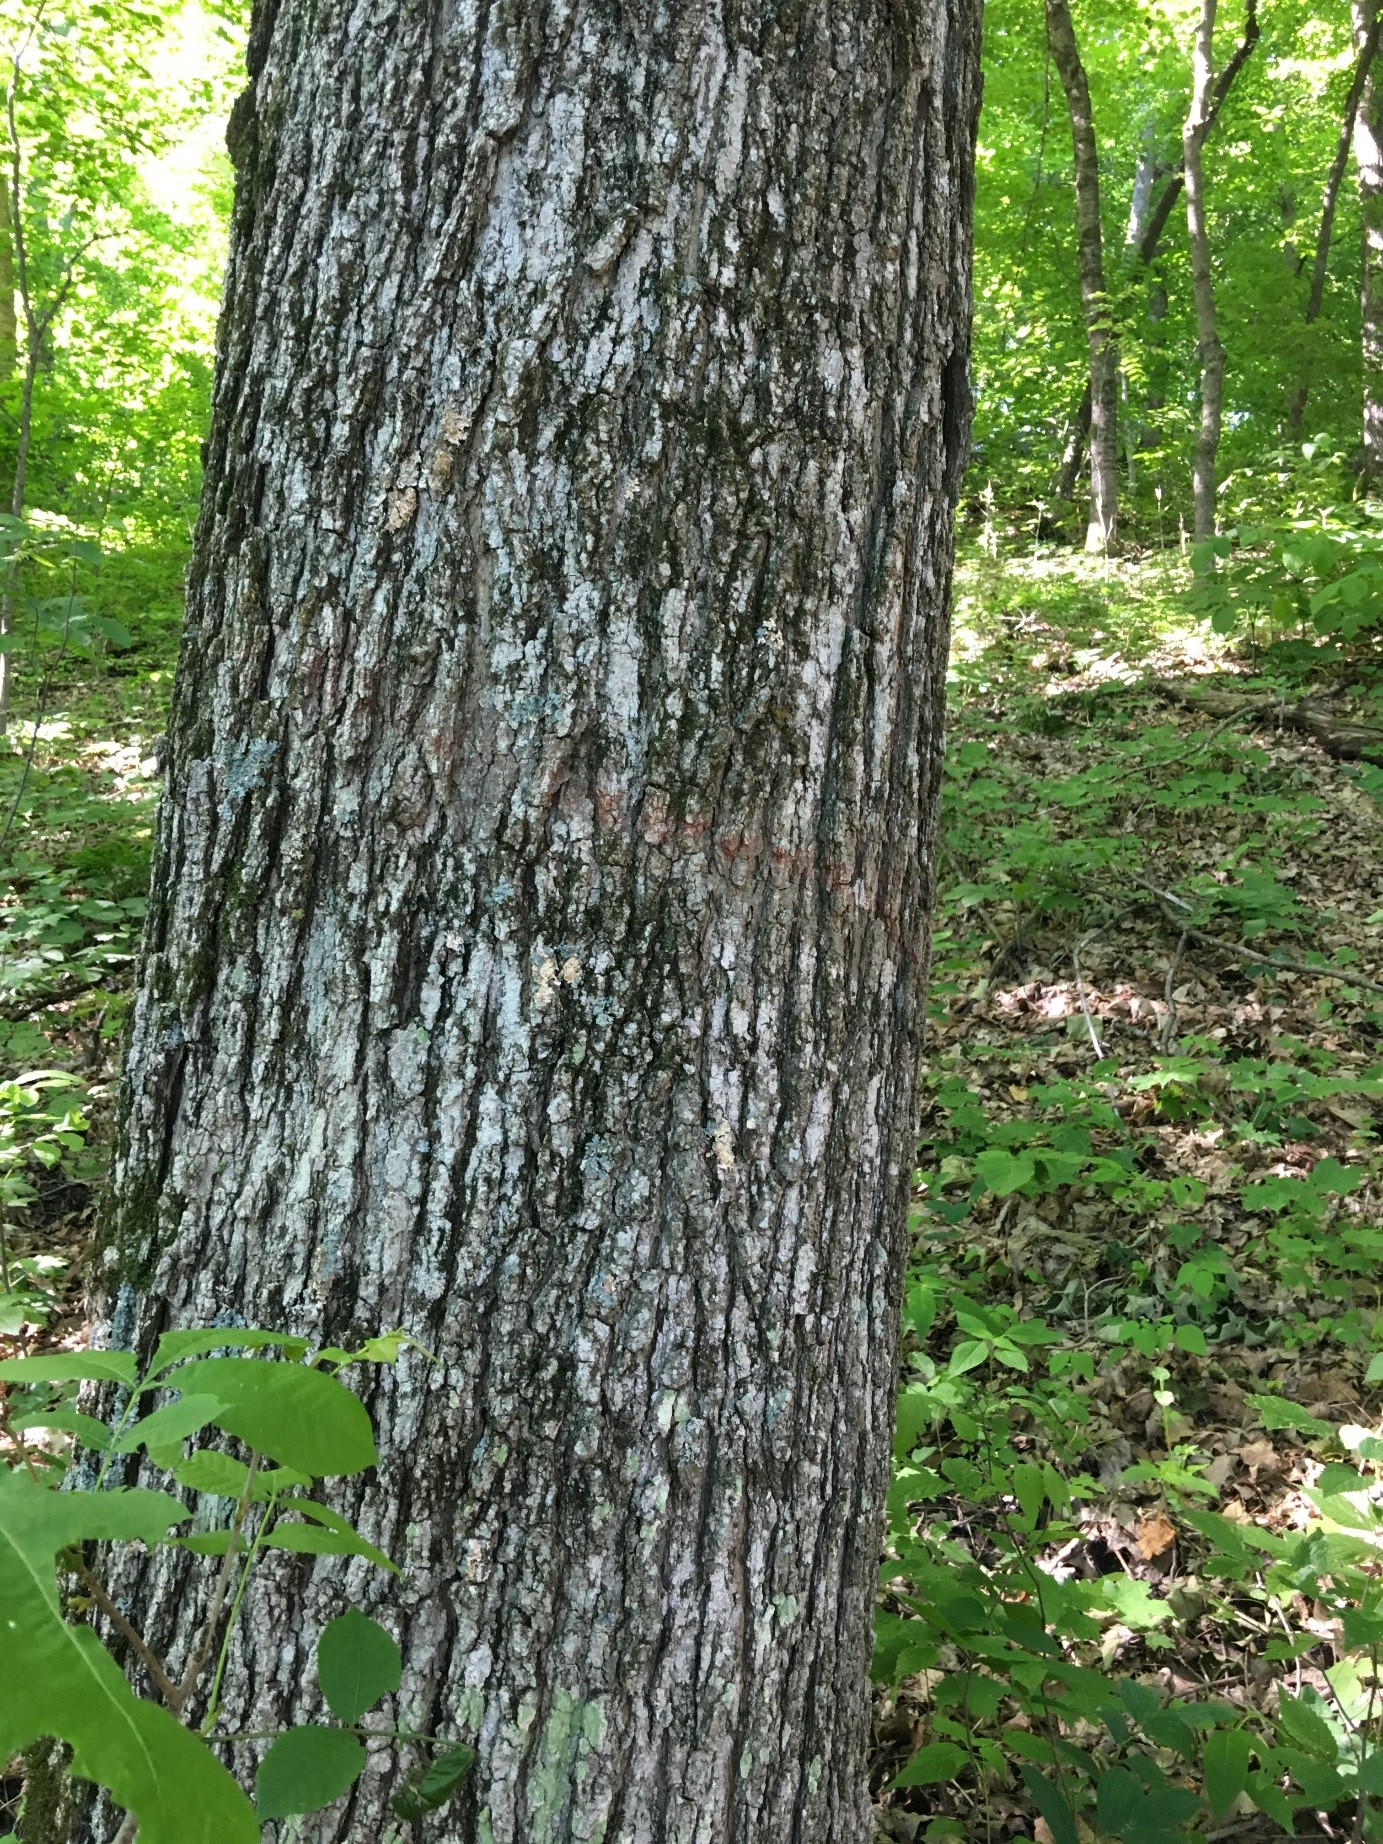 Bough of large sugar maple tree typical on the site. Note the variable stand structure and shade level in the understory in the background